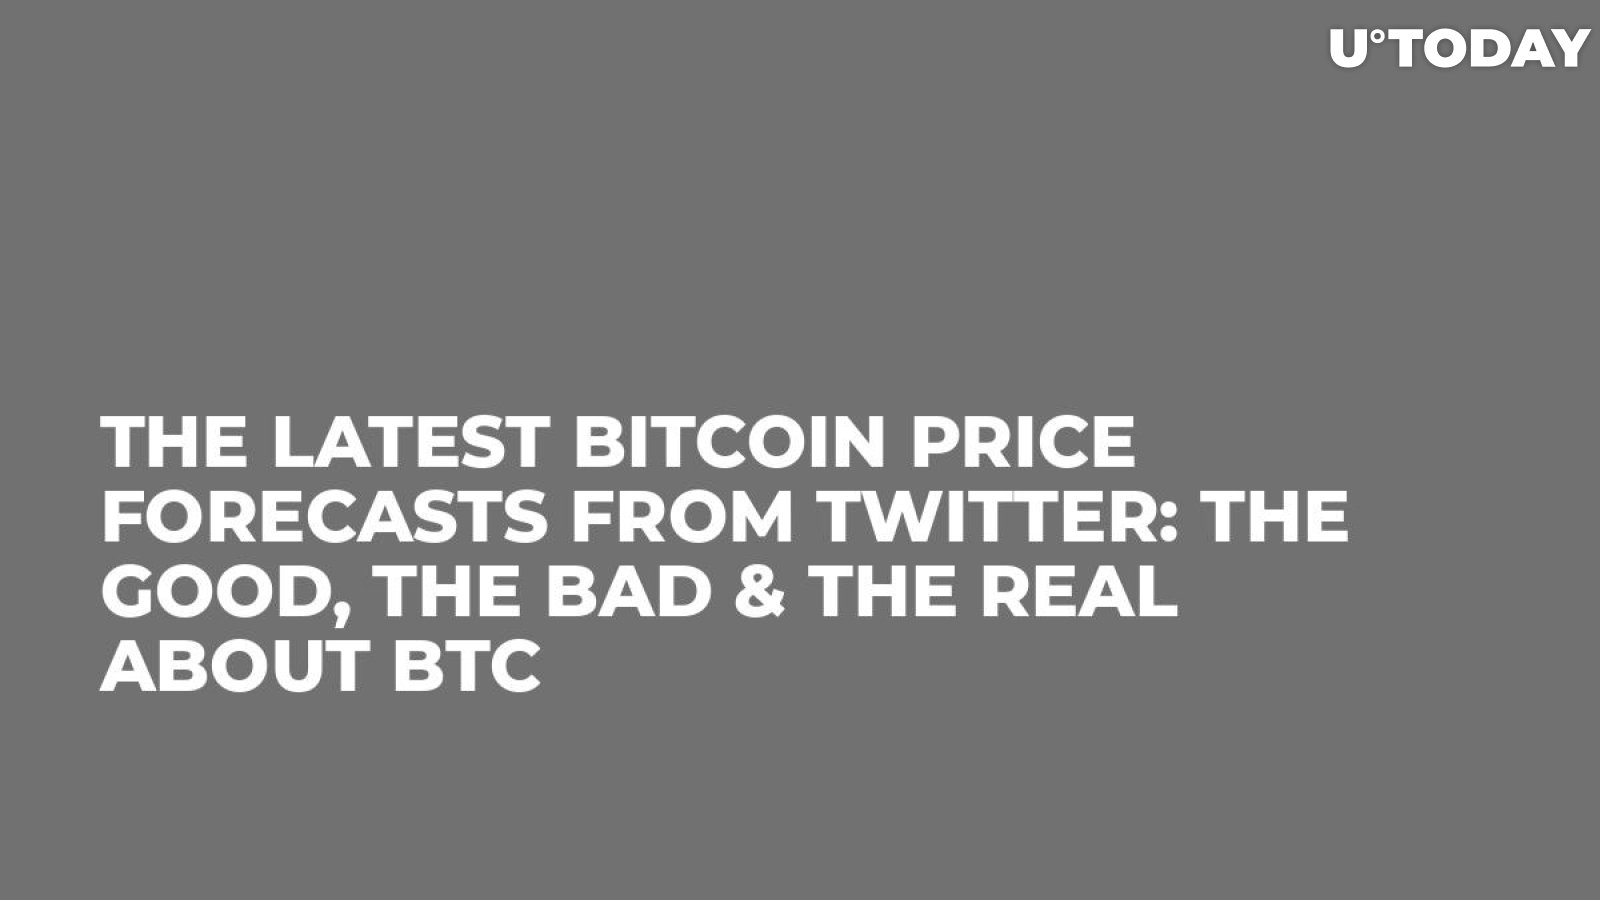 The Latest Bitcoin Price Forecasts from Twitter: The Good, the Bad & the Real About BTC